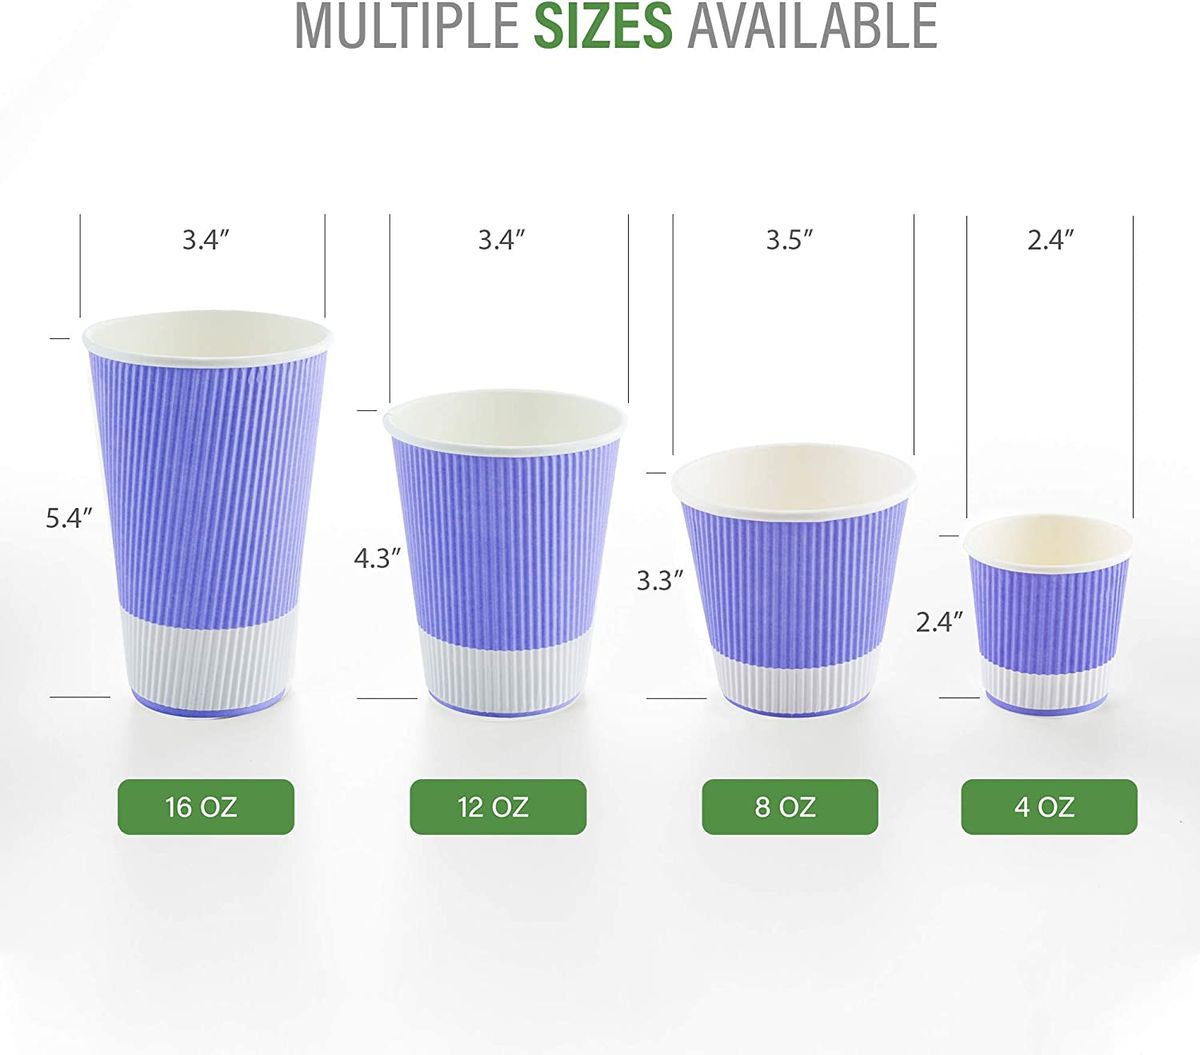 16 oz Eco Green Paper Coffee Cup - Ripple Wall - 3 1/2 inch x 3 1/2 inch x 5 1/2 inch - 500 Count Box